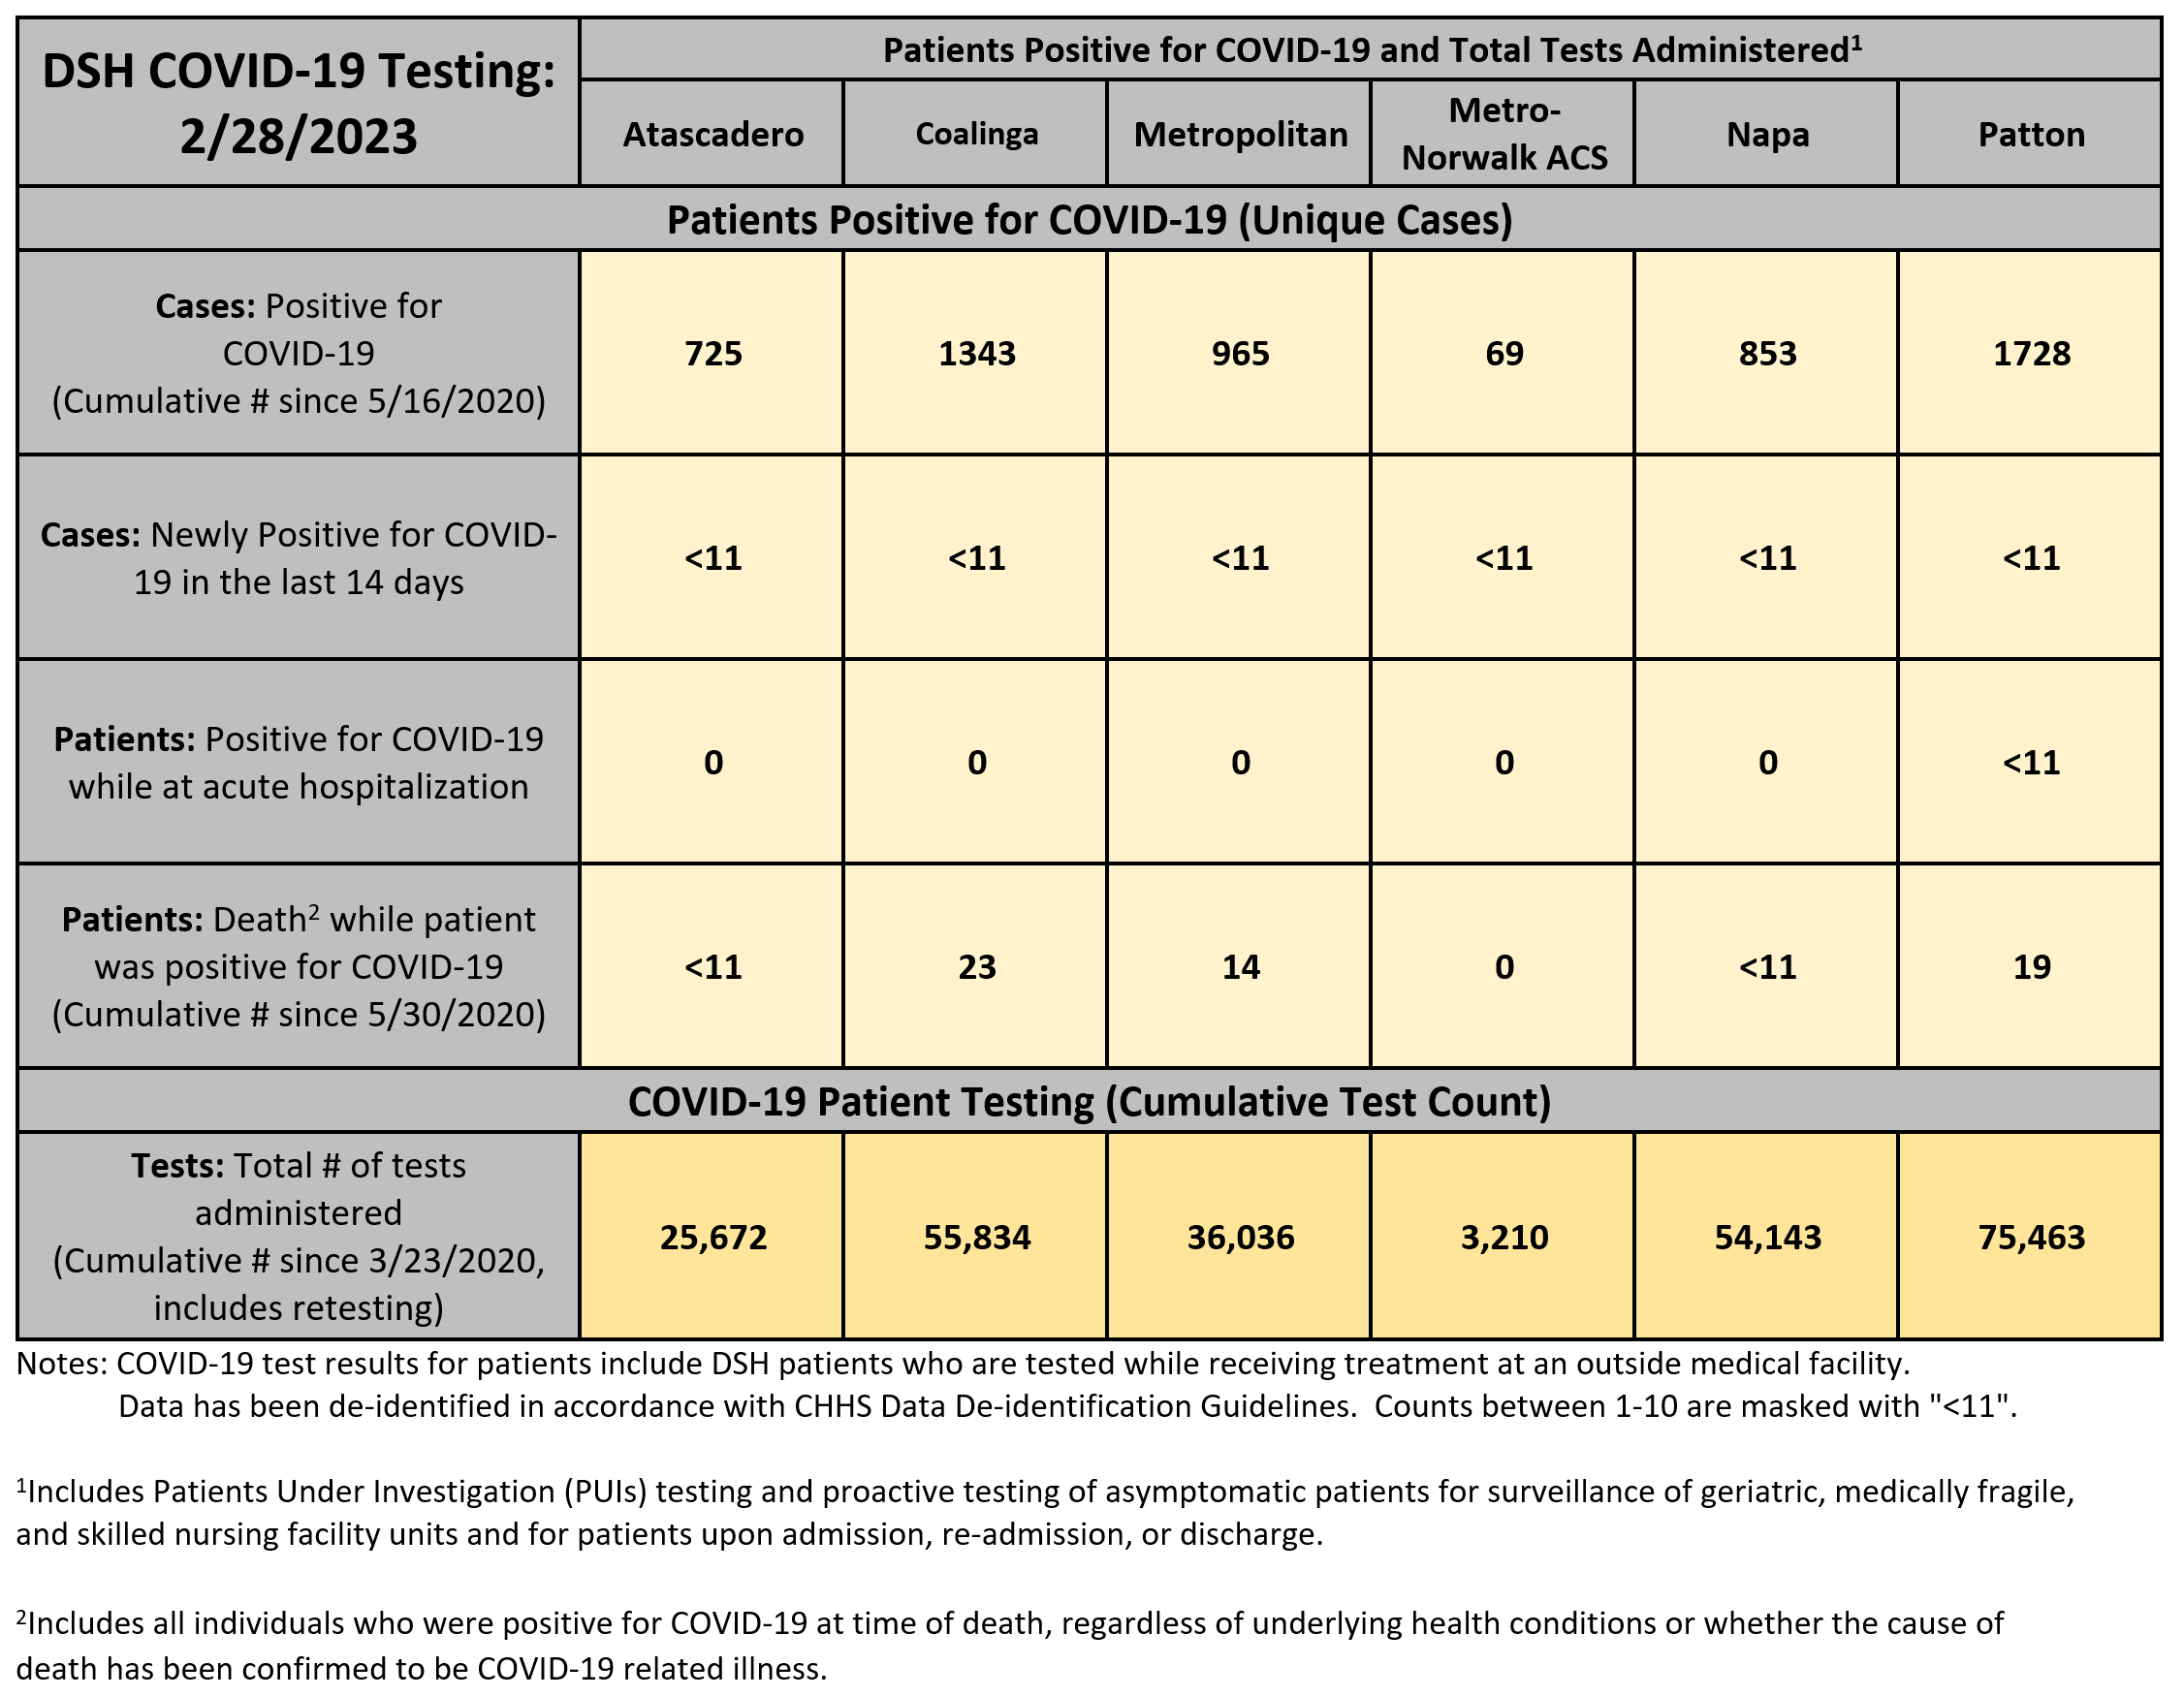 DSH COVID-19 Testing: As of 2/28/2023, Patients Positive for COVID-19 and Total Tests Administered, Cases: Positive for COVID-19 (Cumulative Number since 5/16/2020) - Atascadero: 725, Coalinga: 1343, Metropolitan: 965, Metro-Norwalk ACS: 69, Napa: 853, Patton: 1728  Next Row: Cases: Newly Positive for COVID-19 in the last 14 days  Atascadero: Less than 11, Coalinga: Less than 11, Metropolitan: Less than 11, Metro-Norwalk ACS: Less than 11, Napa: Less than 11, Patton: Less than 11  Next Row: Patients: Positive for COVID-19 while at acute hospitalization  Atascadero: 0, Coalinga: 0, Metropolitan: 0, Metro-Norwalk ACS: 0, Napa: 0, Patton: Less than 11  Next Row: Patients: Death while patient was positive for COVID-19 (Cumulative Number since 5/30/2020)  Atascadero: Less Than 11, Coalinga: 23, Metropolitan: 14, Metro-Norwalk ACS: 0, Napa: Less Than 11, Patton: 19, next section - COVID-19 Testing (Cumulative Test Count), Tests: Total Number of tests administered(Cumulative Number since 3/23/2020, includes retesting) - Atascadero: 25,672, Coalinga: 55,834, Metropolitan: 36,036, Metro-Norwalk ACS: 3,210, Napa: 54,143, Patton: 75,463. subnotes: COVID-19 test results for patients include DSH patients who are tested while receiving treatment at an outside medical facility. Data has been de-identified in accordance with CHHS Data De-identification Guidelines. Counts between 1-10 are masked with Less than 11.   Includes Patients Under Investigation (PUIs) testing and proactive testing of asymptomatic patients for surveillance of geriatric, medically fragile, and skilled nursing facility units and for patients upon admission, re-admission, or discharge. Includes all individuals who were positive for COVID-19 at time of death, regardless of underlying health conditions or whether the cause of death has been confirmed to be COVID-19 related illness.